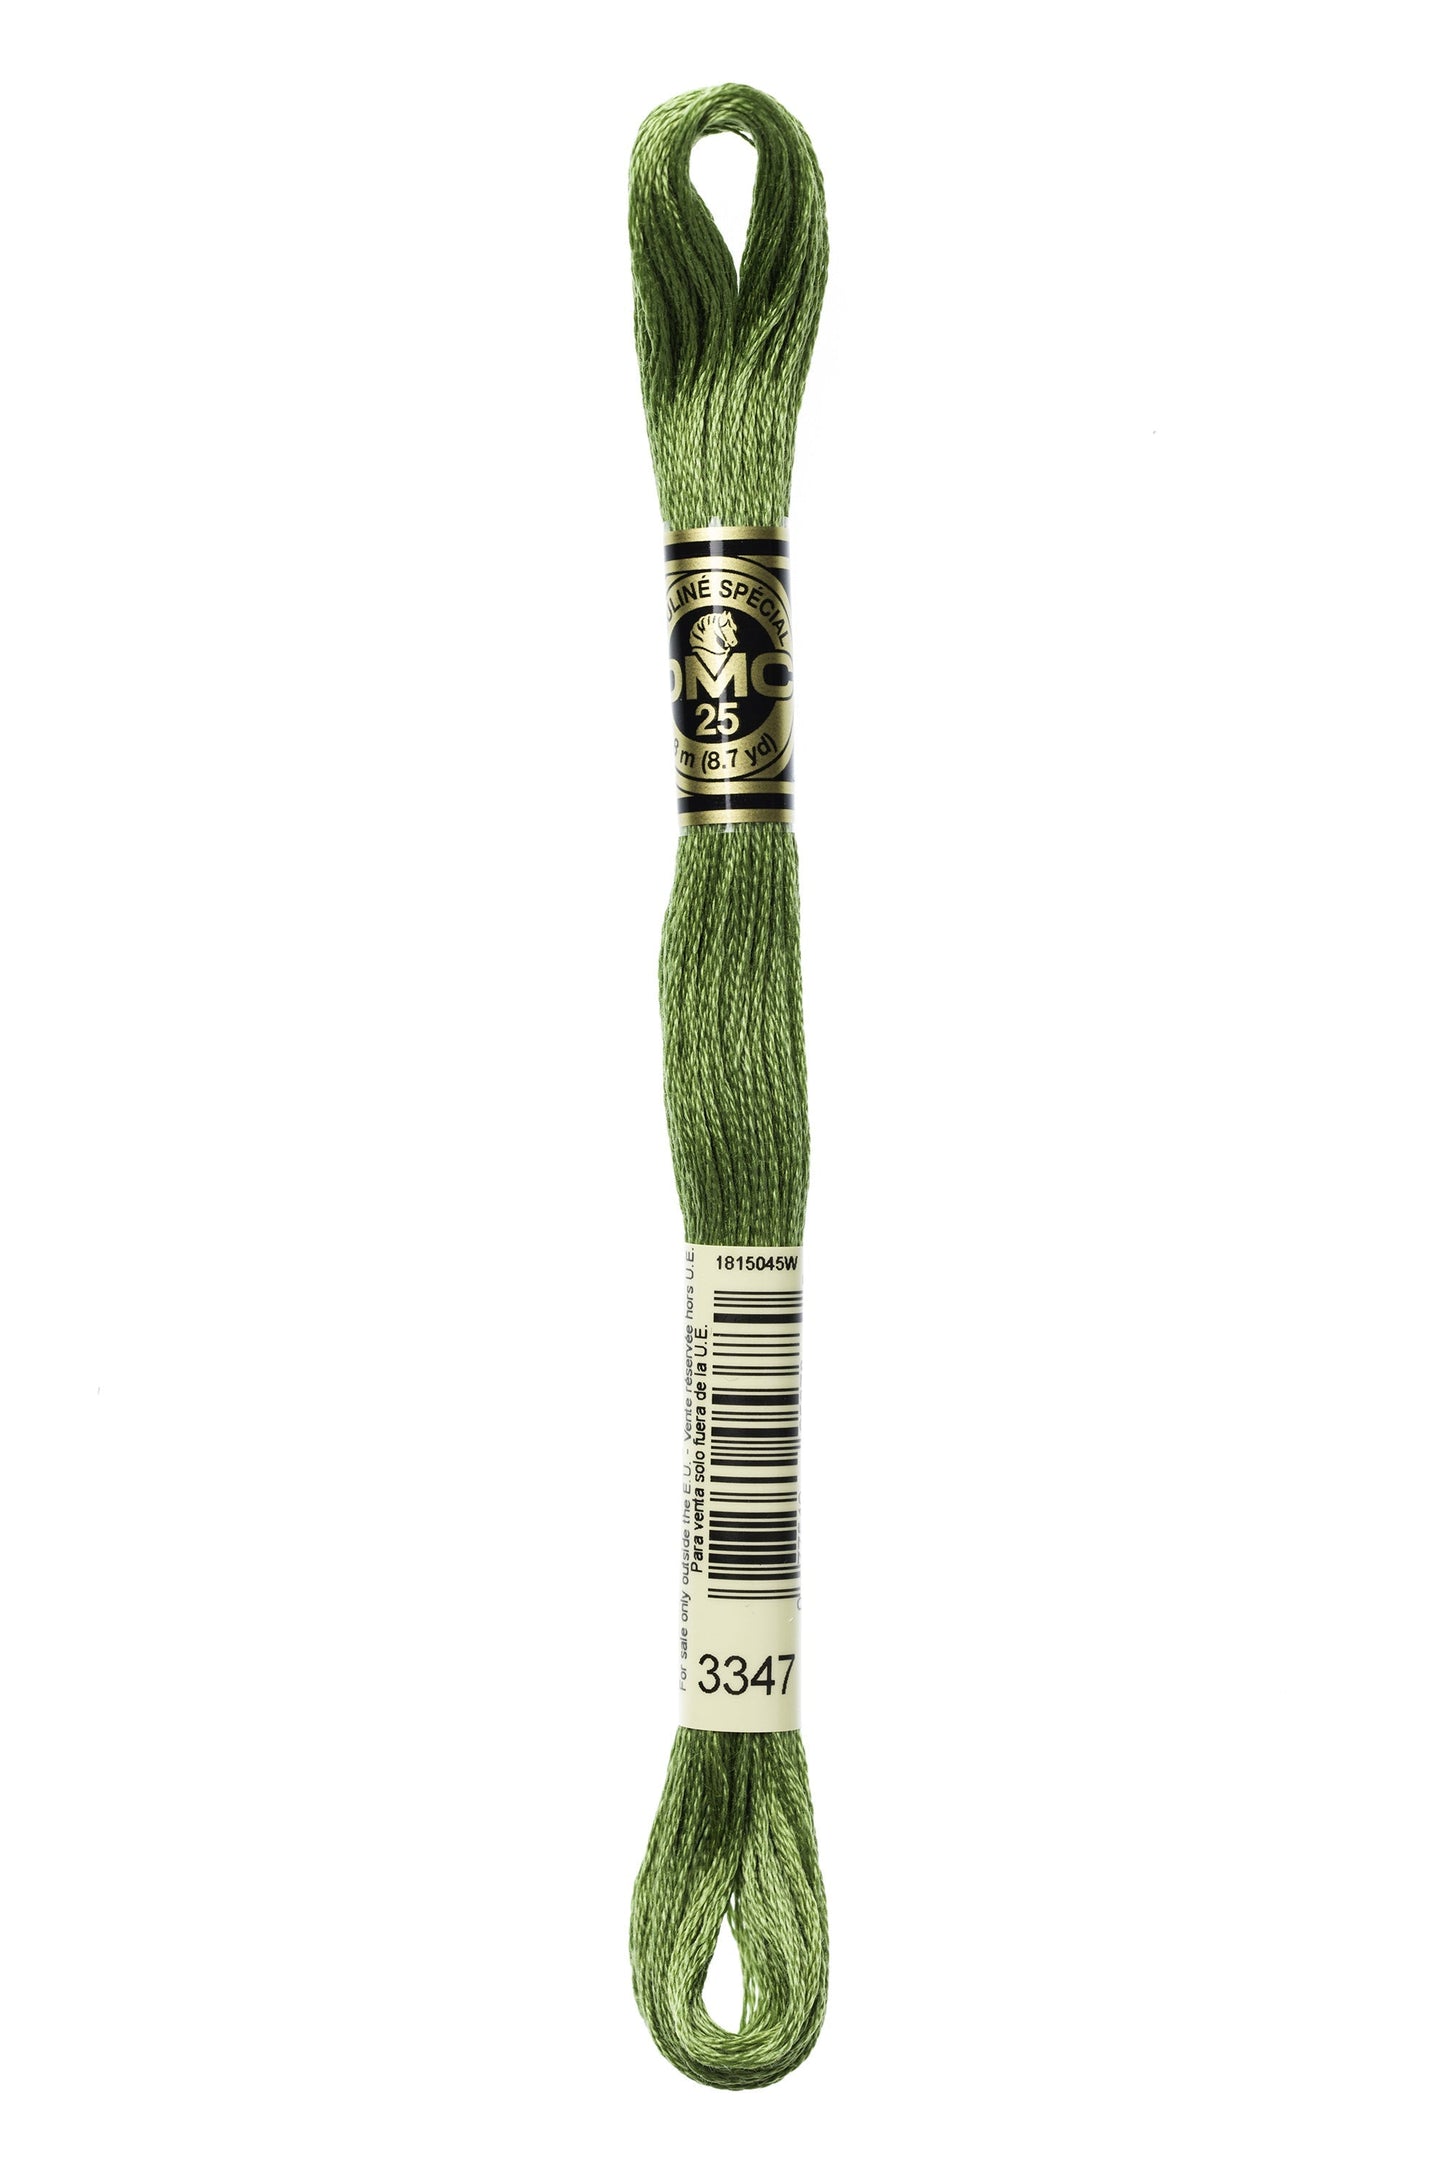 Six-Strand Embroidery Floss - 3347 (Asparagus)-Embroidery Thread-Wild and Woolly Yarns